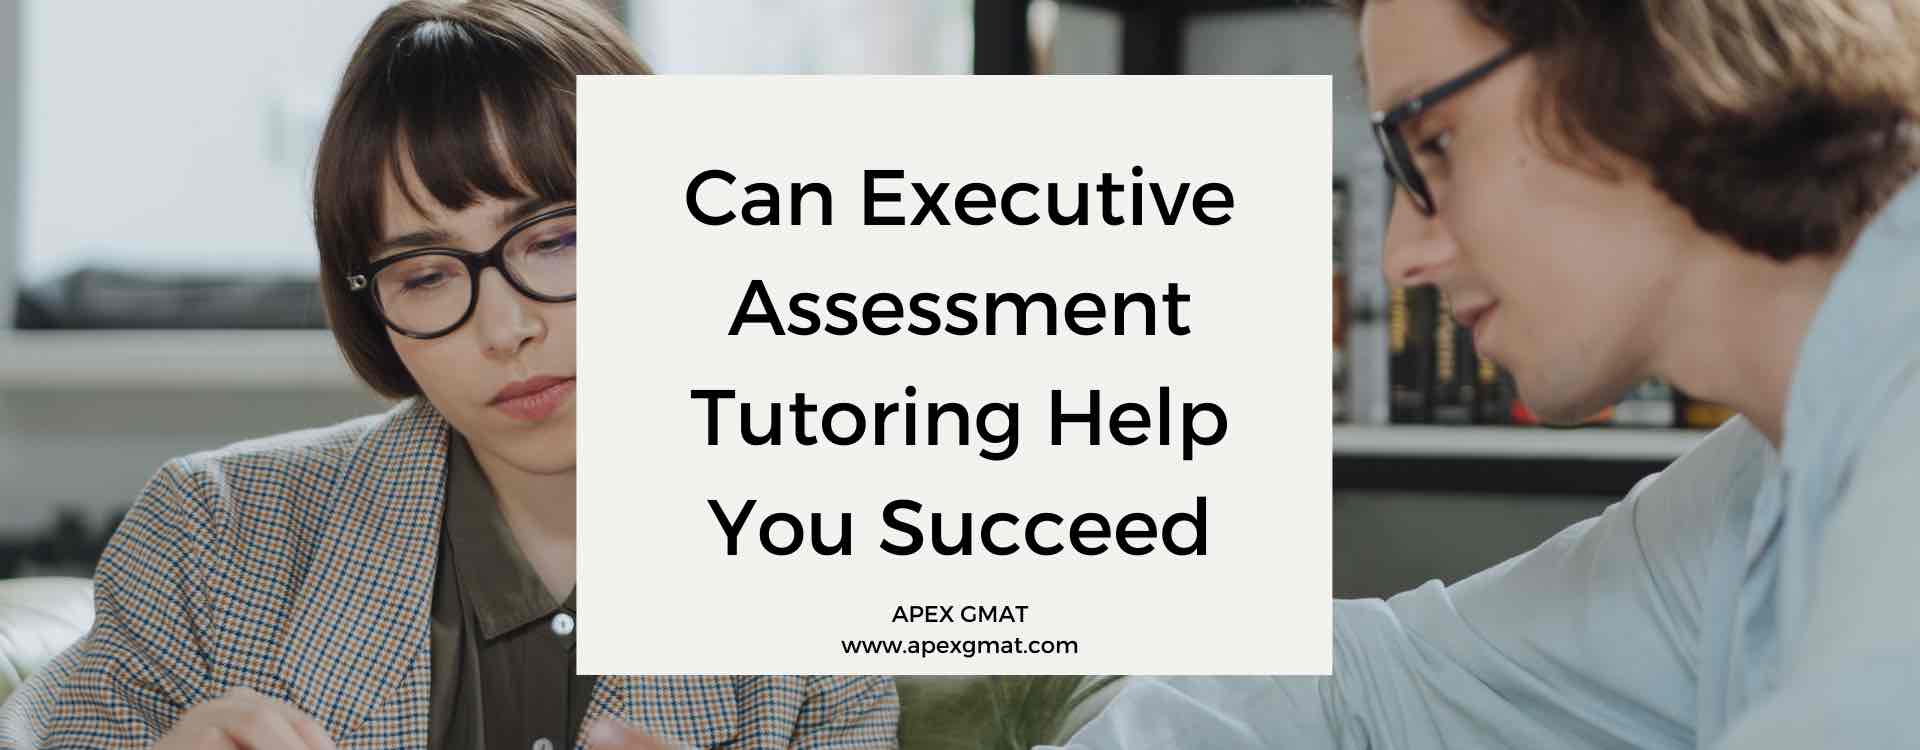 Can Executive Assessment Tutoring Help You Succeed